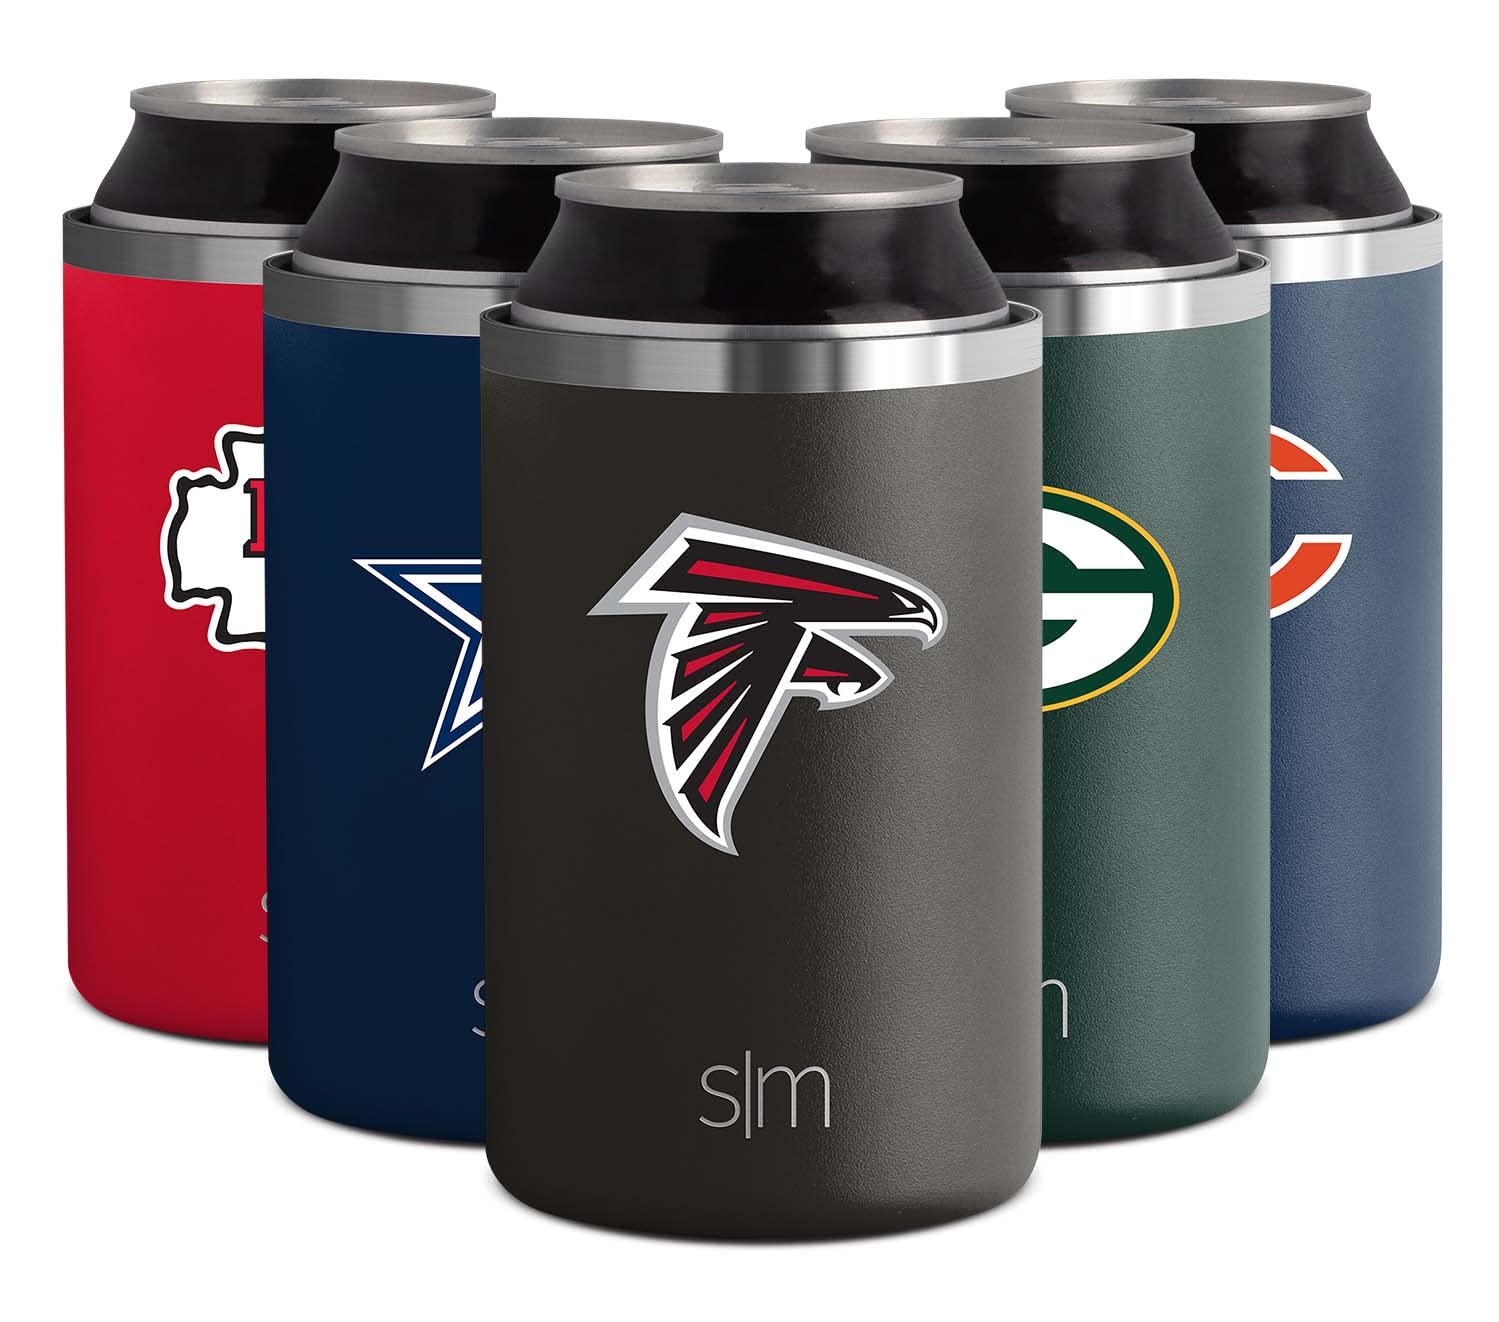 Simple Modern Officially Licensed Nfl Atlanta Falcons Gifts For Men, Women, Dads, Fathers Day  Insulated Ranger Can Cooler For S